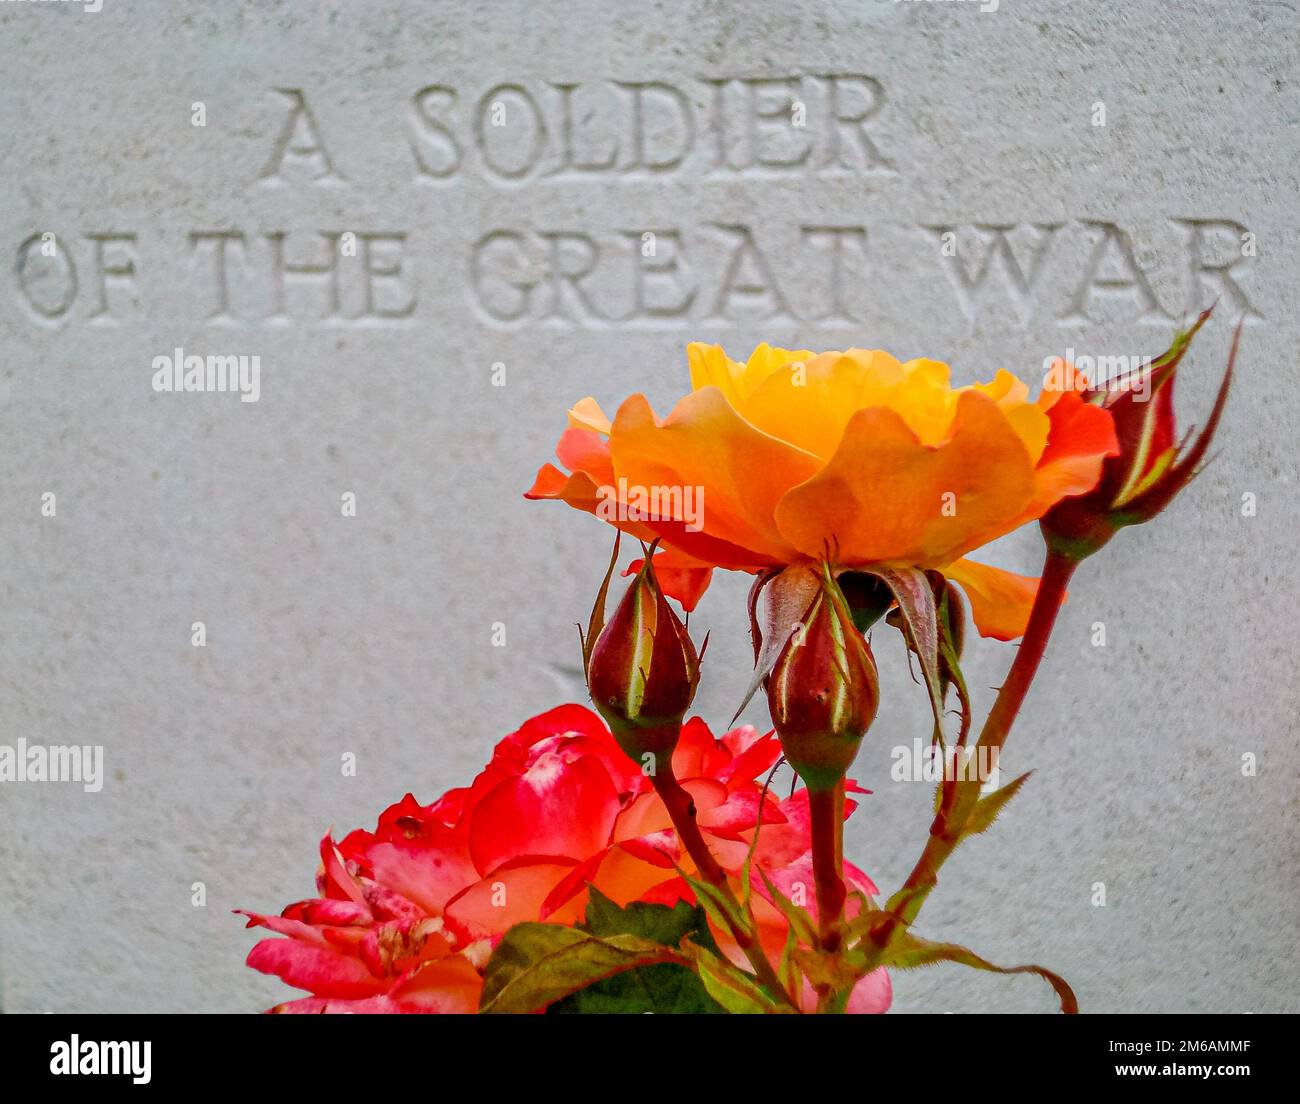 Commonwealth War Grave Headstone for unidentified soldier with colourful flowers Stock Photo